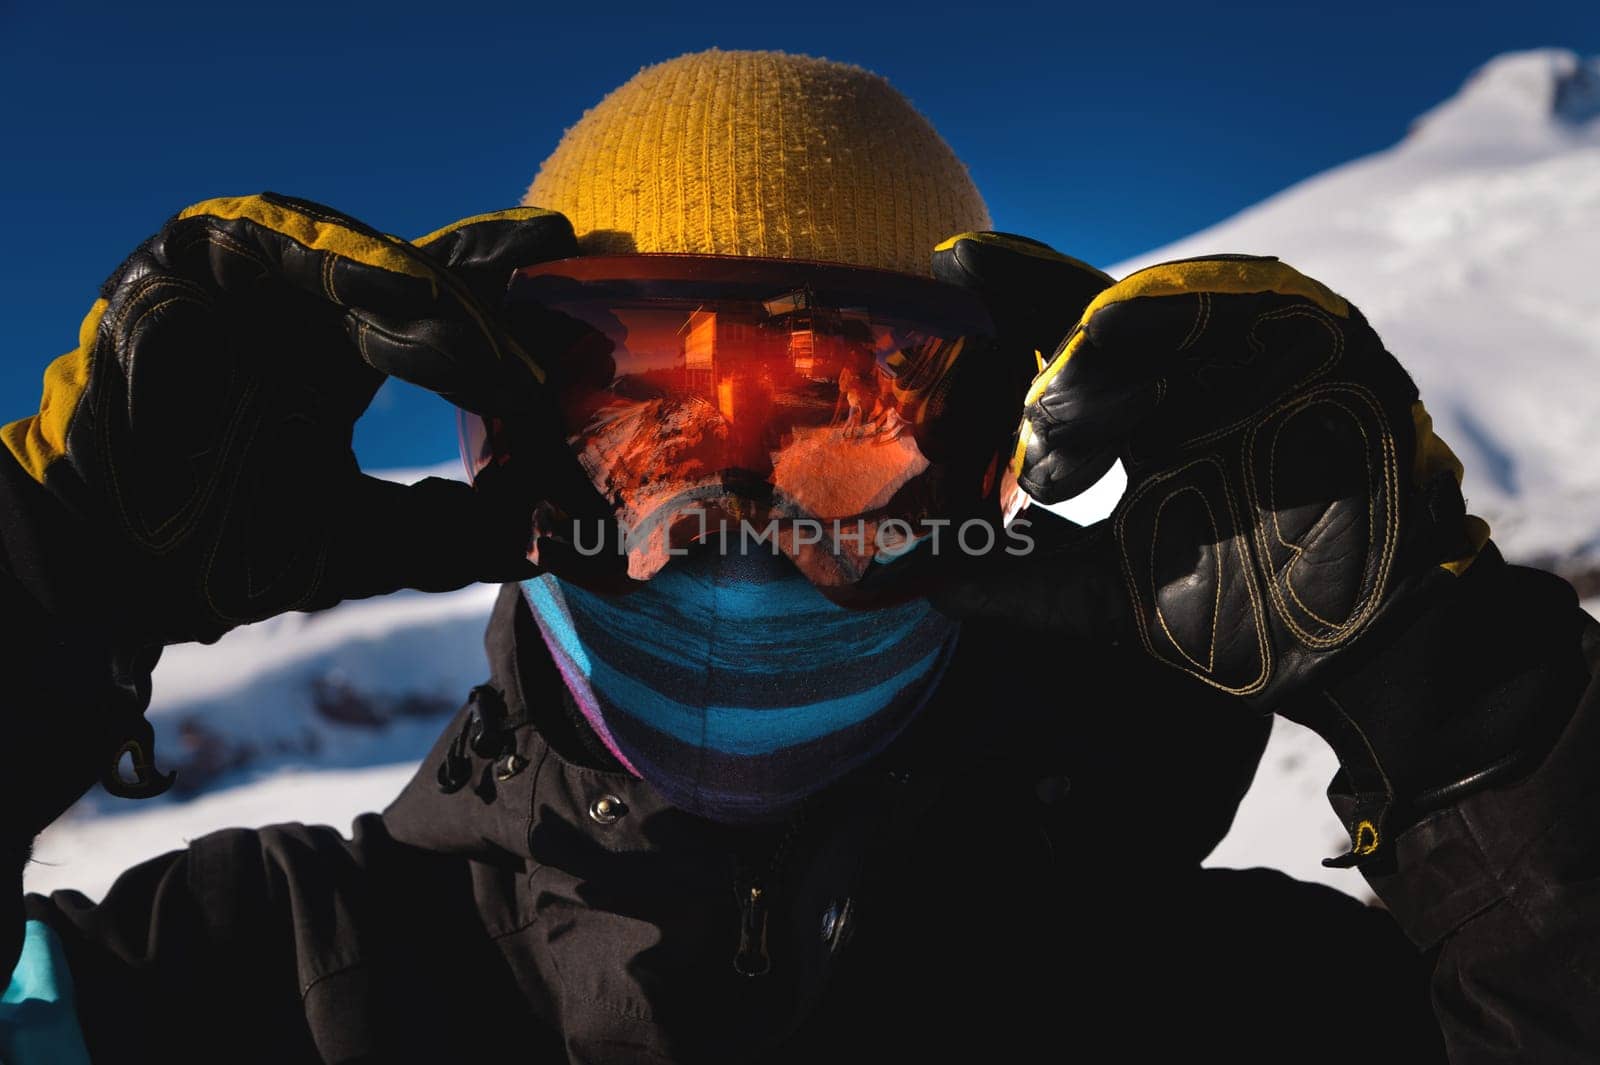 Man in ski goggles. Close-up of a young man in a mask in winter on a ski slope on a sunny day.